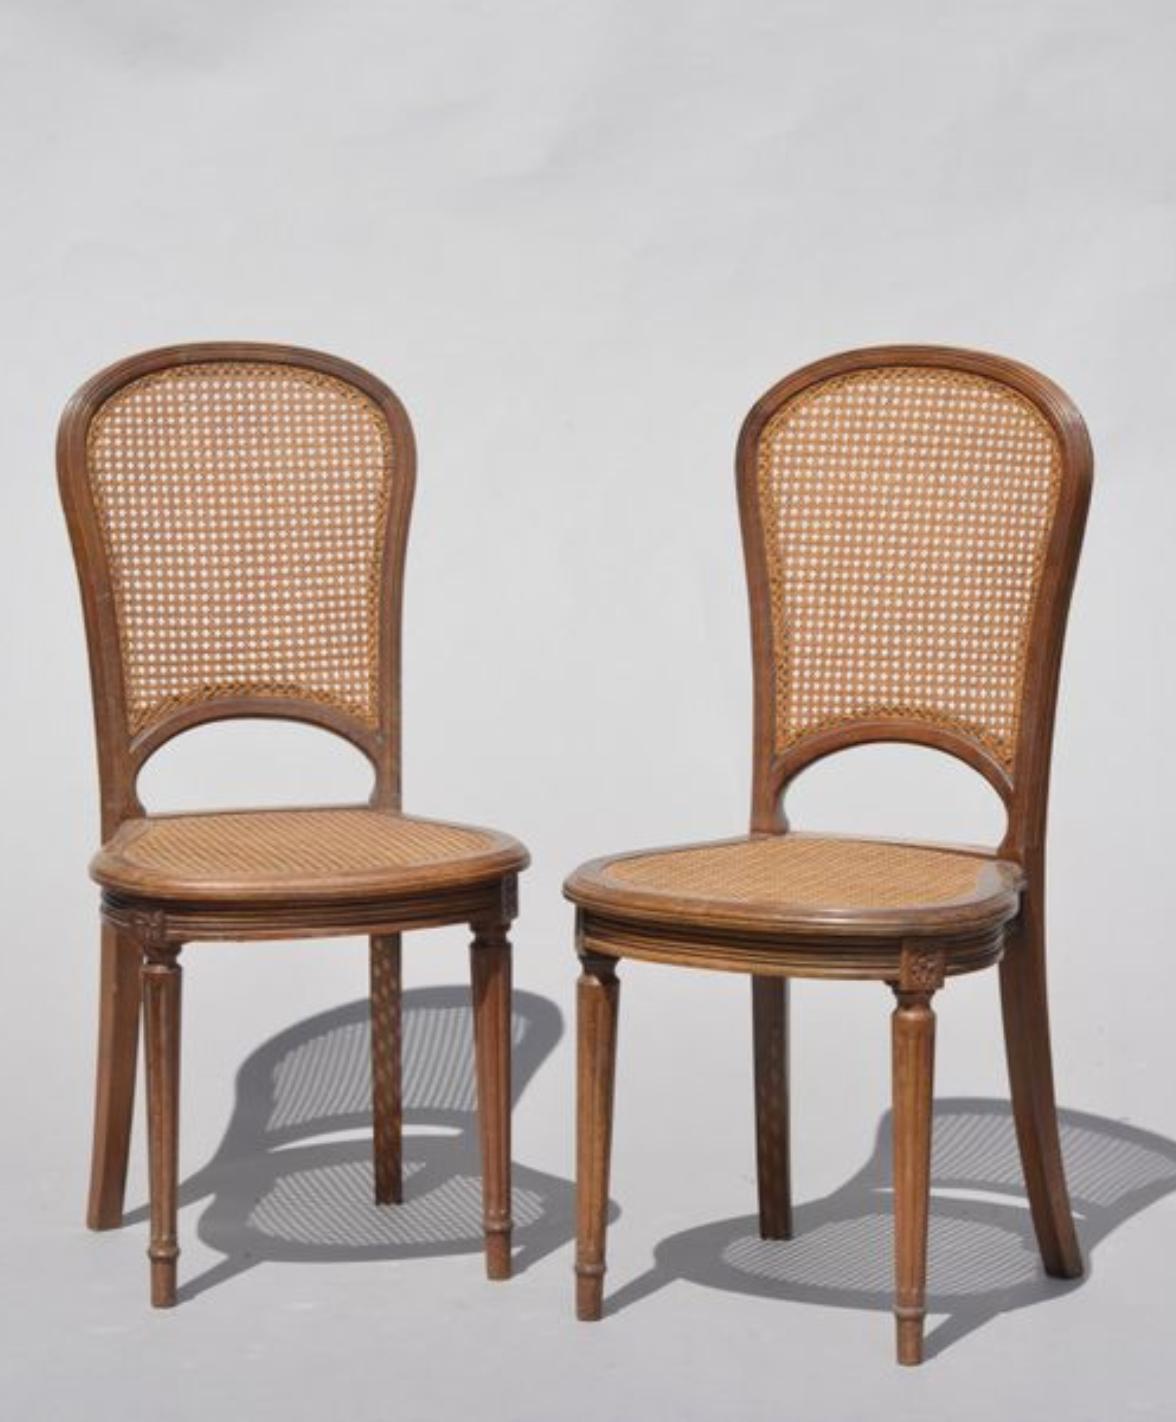 Pair of petite French oval side chairs, in Louis XVI style made of walnut with different front legs with cannelures. Hand carved frame and caned backs and seats,
circa 1890.